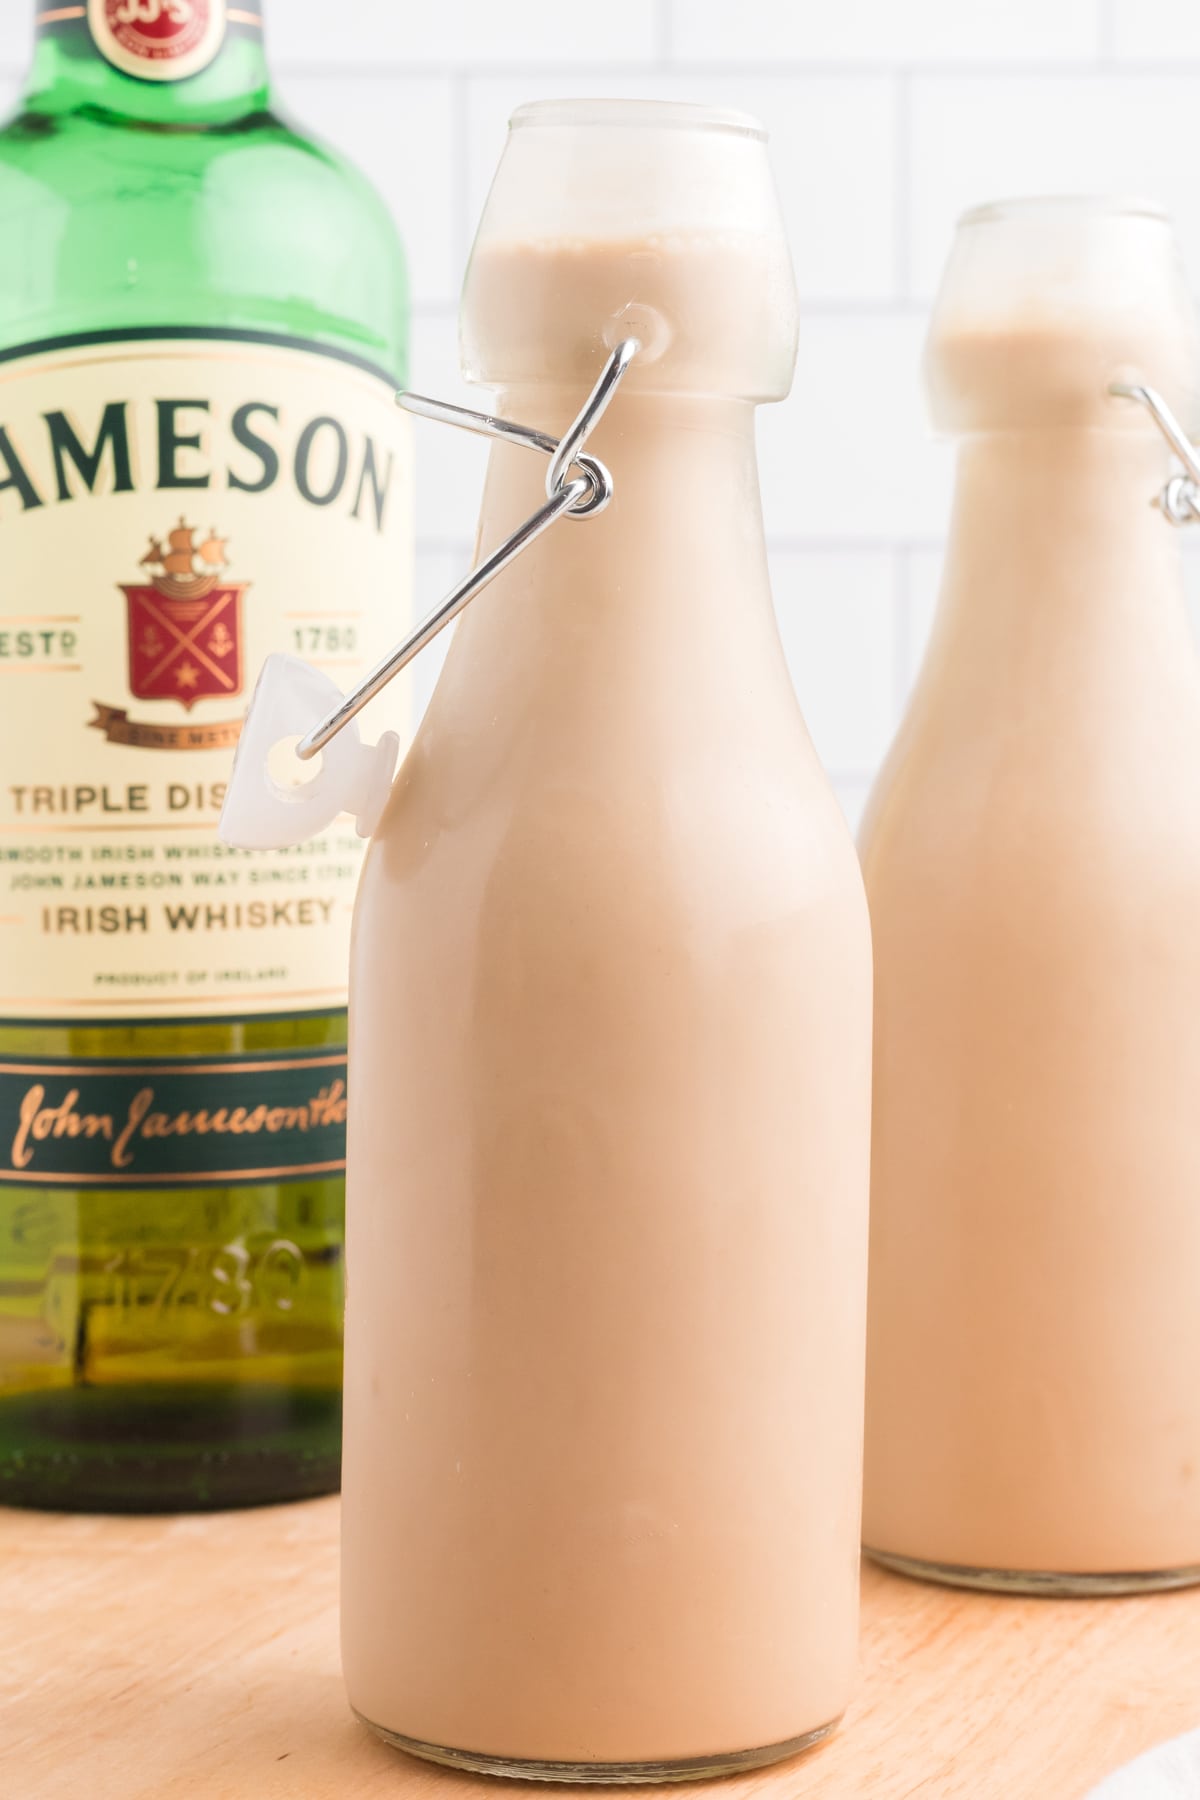 Two bottles of homemade Baileys in front of a bottle of Jameson